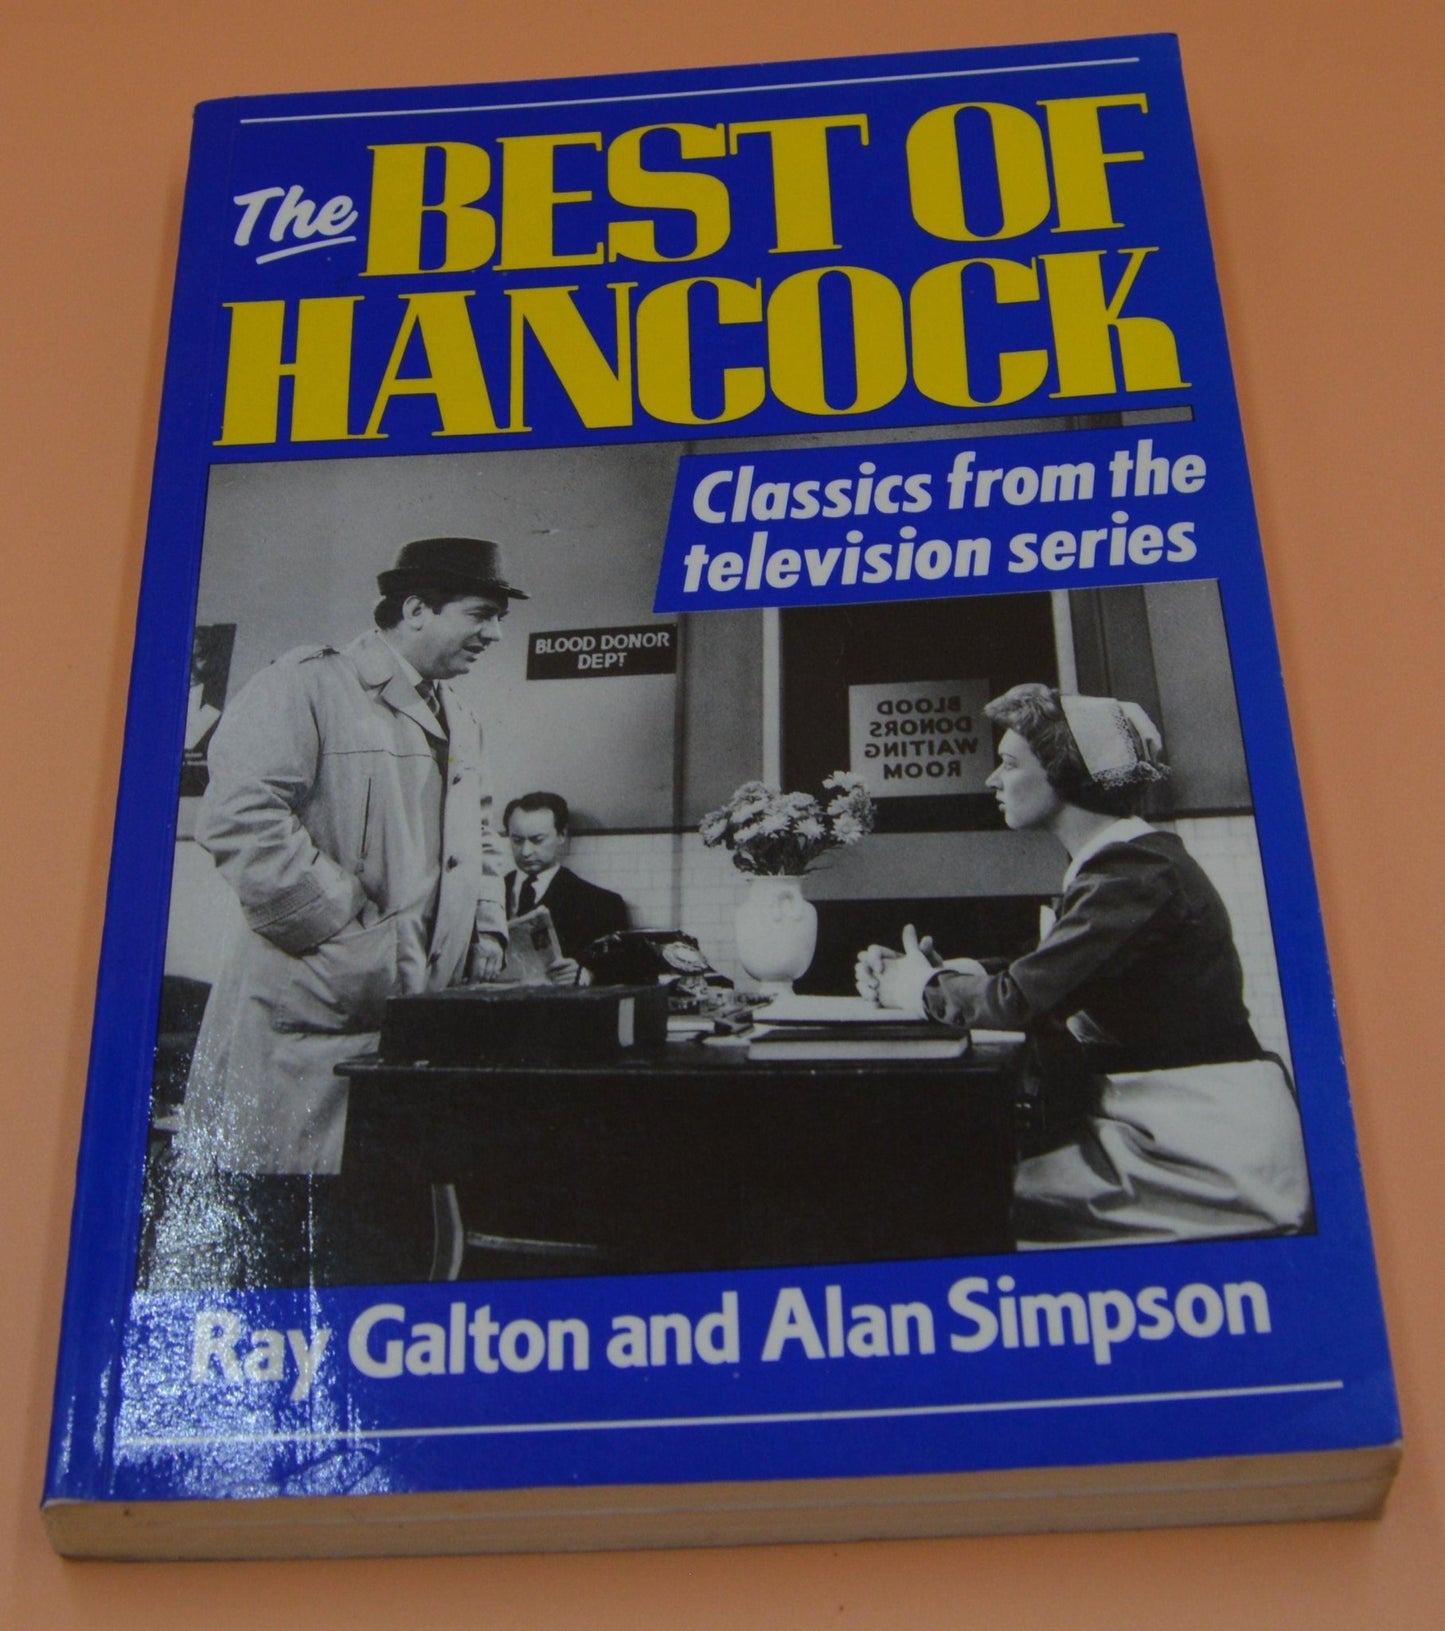 SECONDHAND BOOK BEST OF HANCOCK by RAY GALTON & ALAN SIMPSON - TMD167207